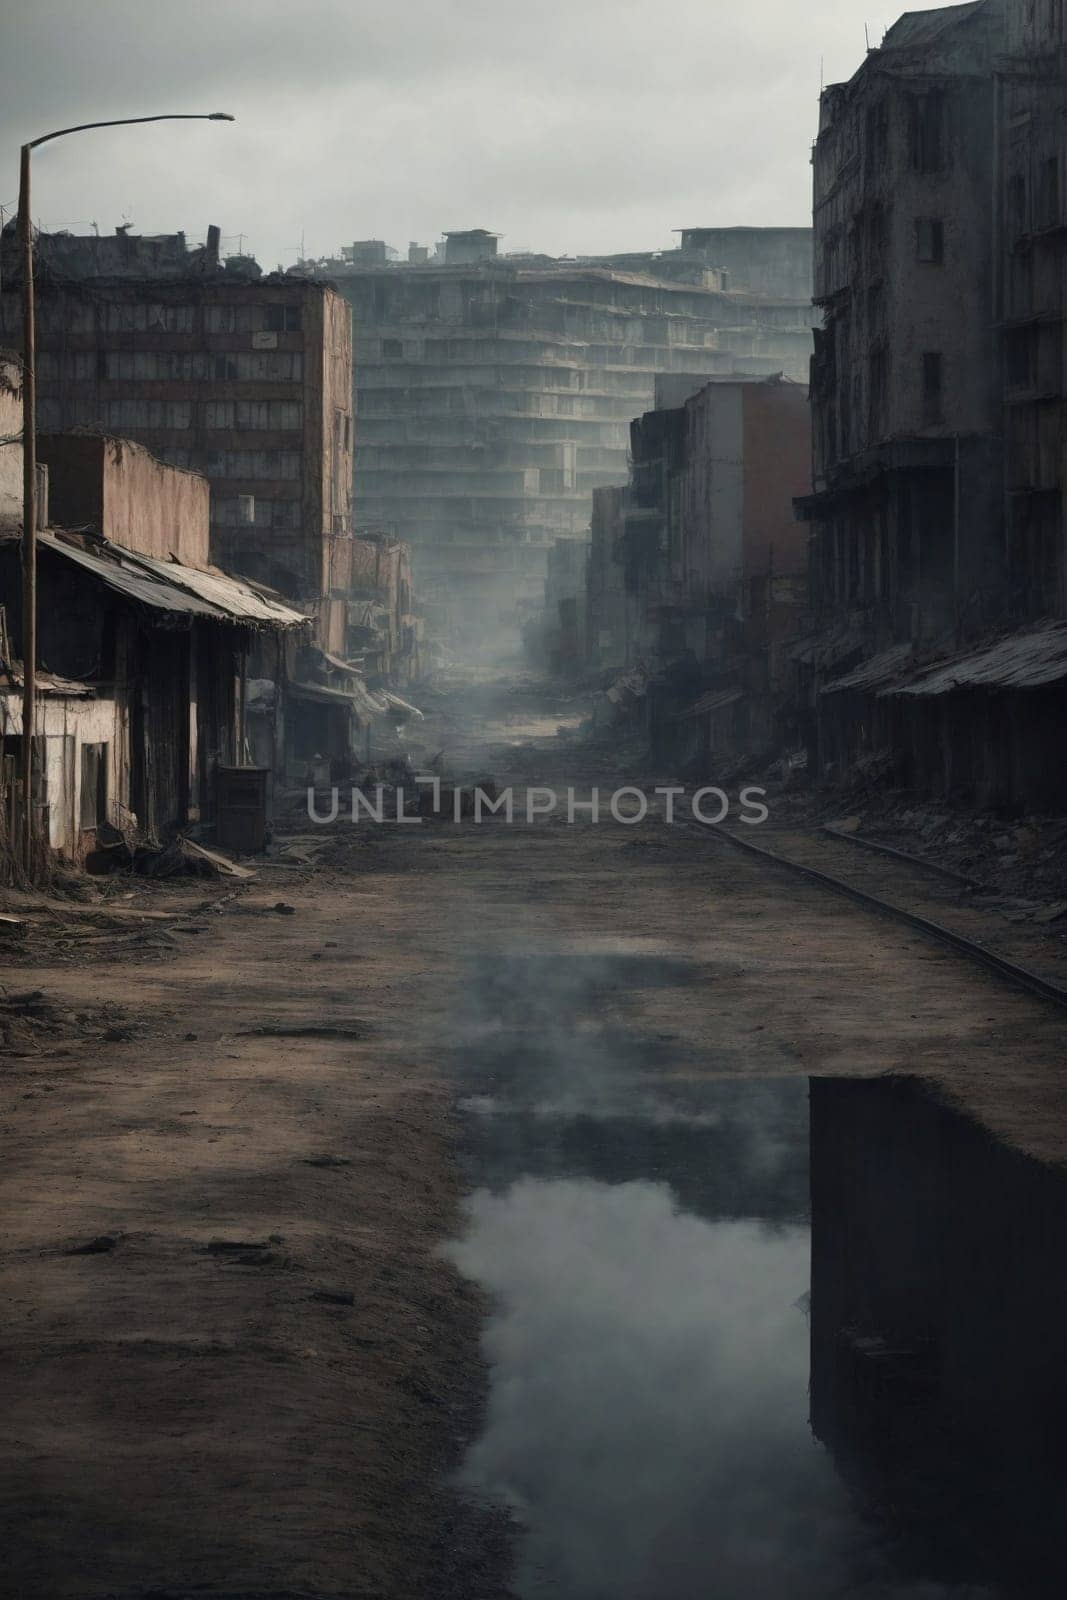 This photo captures a dirty street with a central puddle of water.